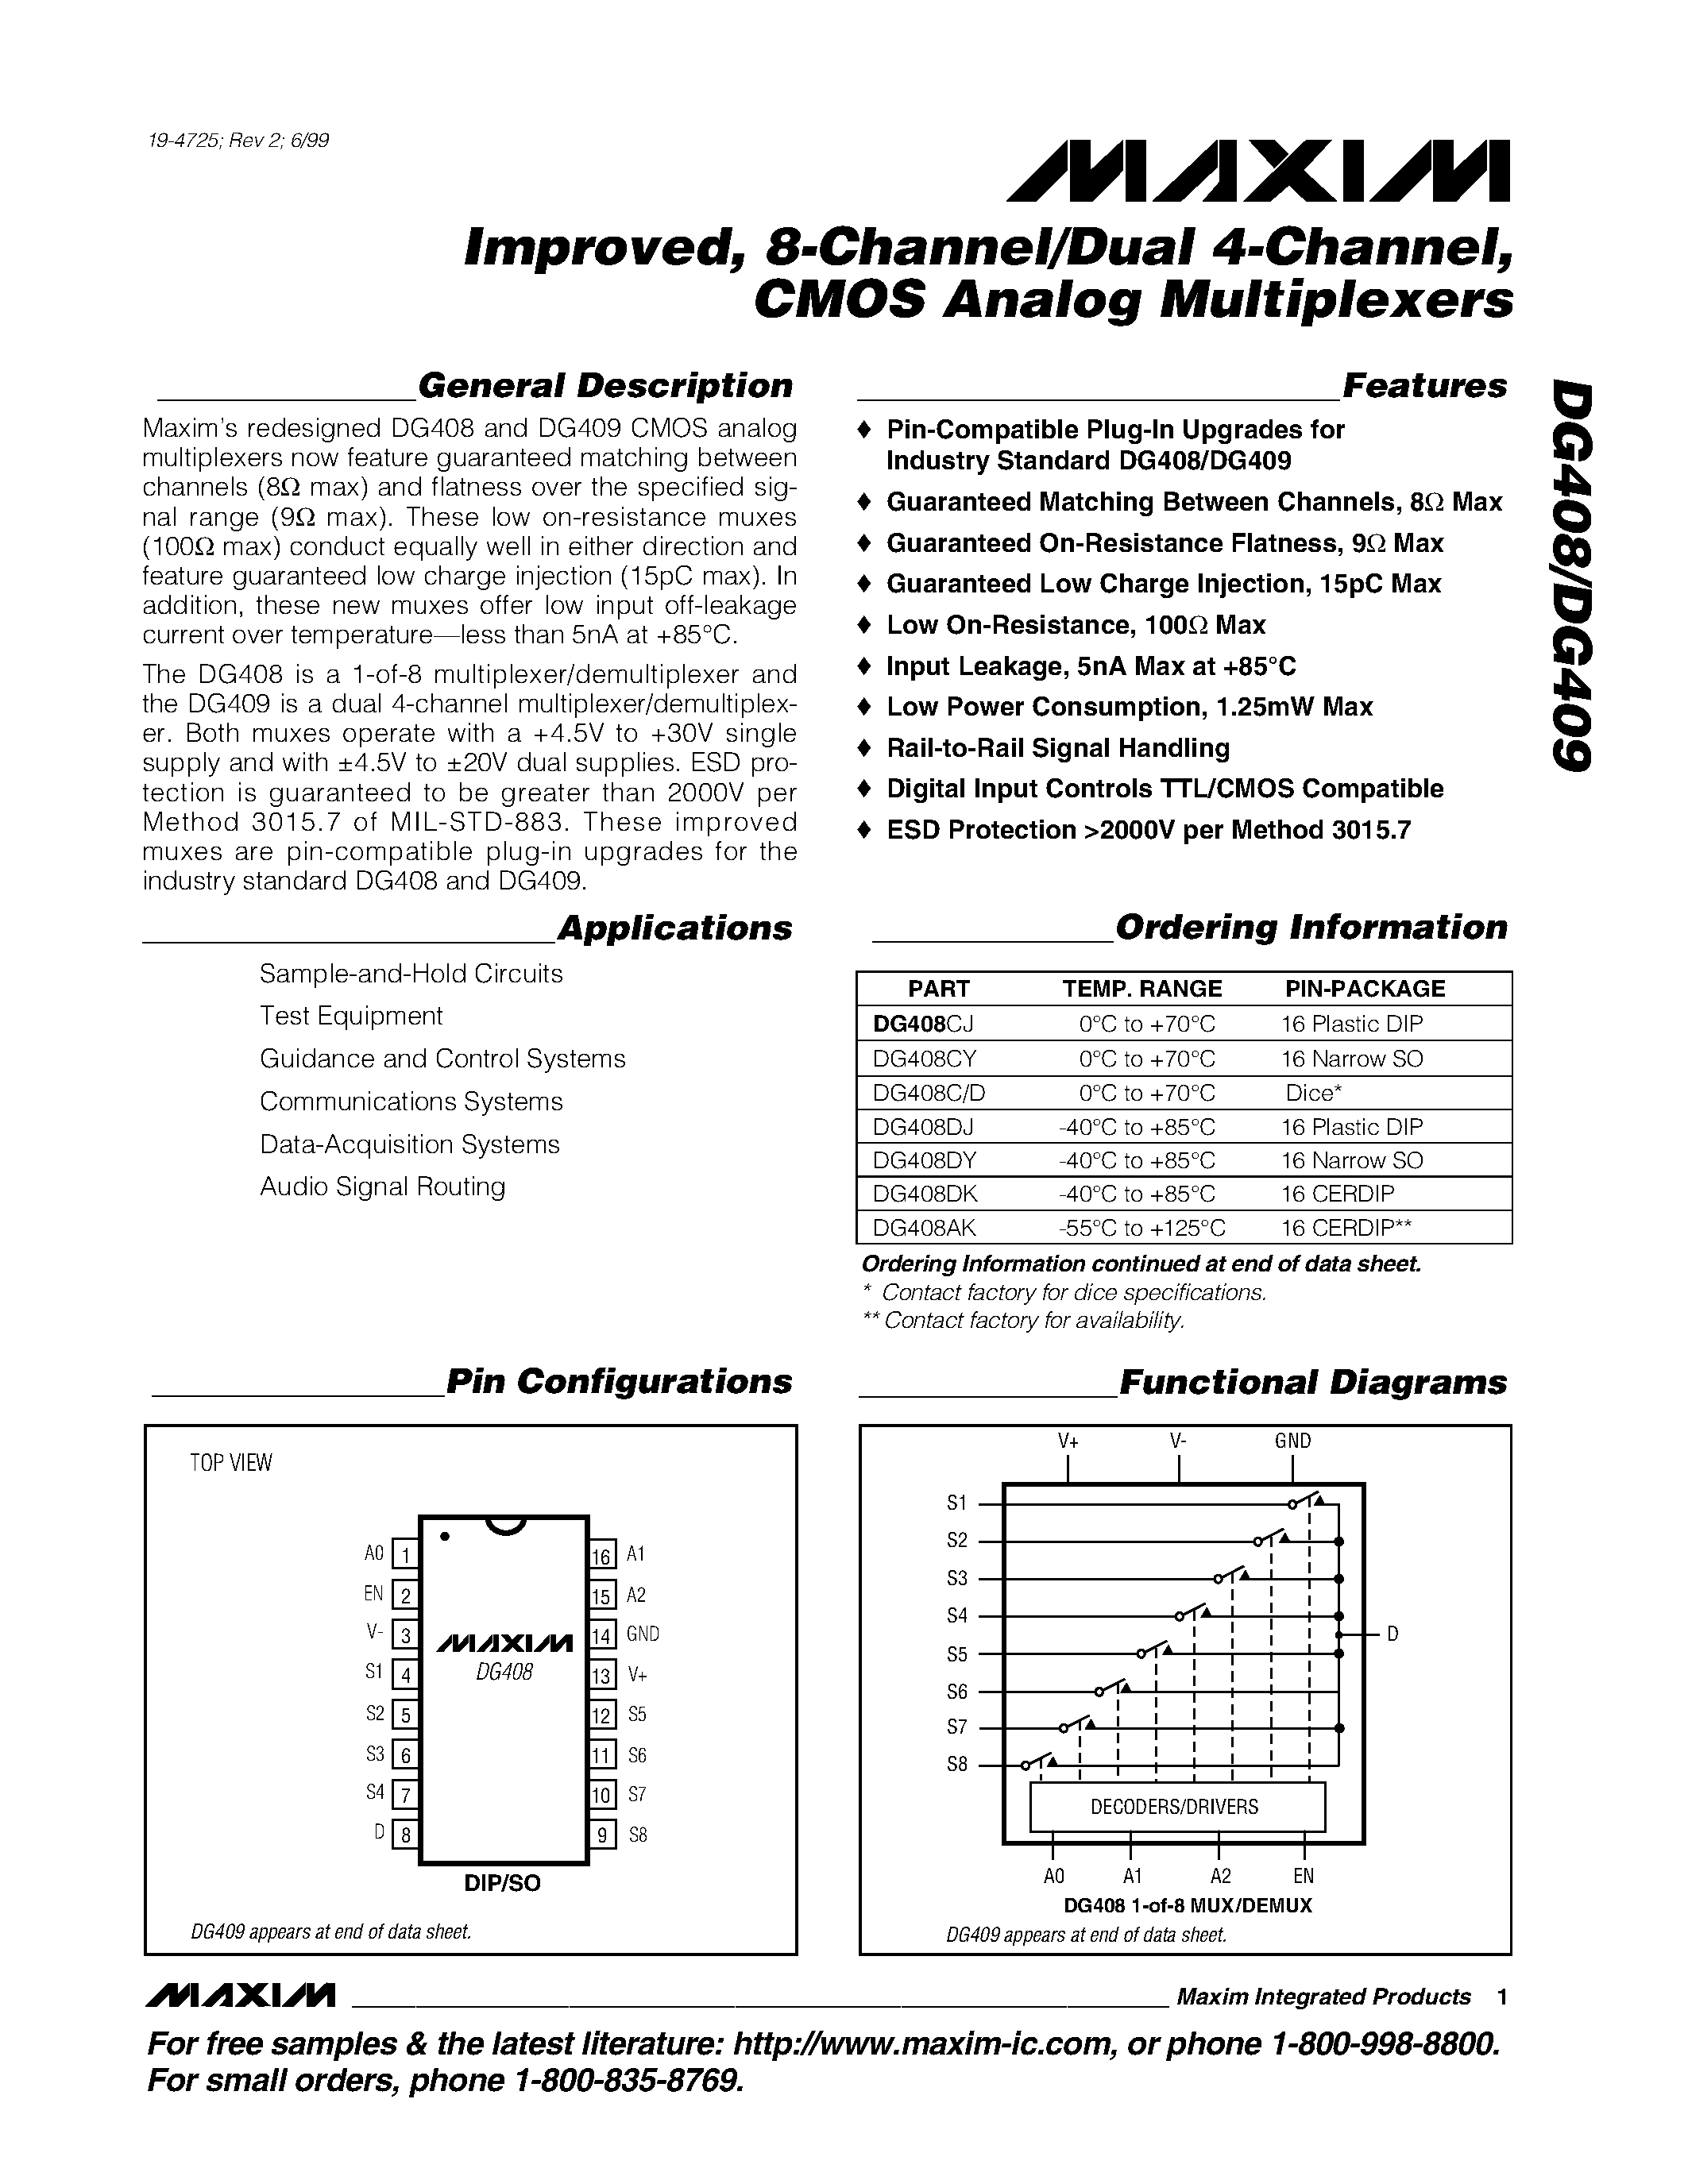 Datasheet DG408C/D - iMPROVED / 8-cHANNEL/dUAL 4-cHANNEL / cmos aNALOG mULTIPLEXERS page 1